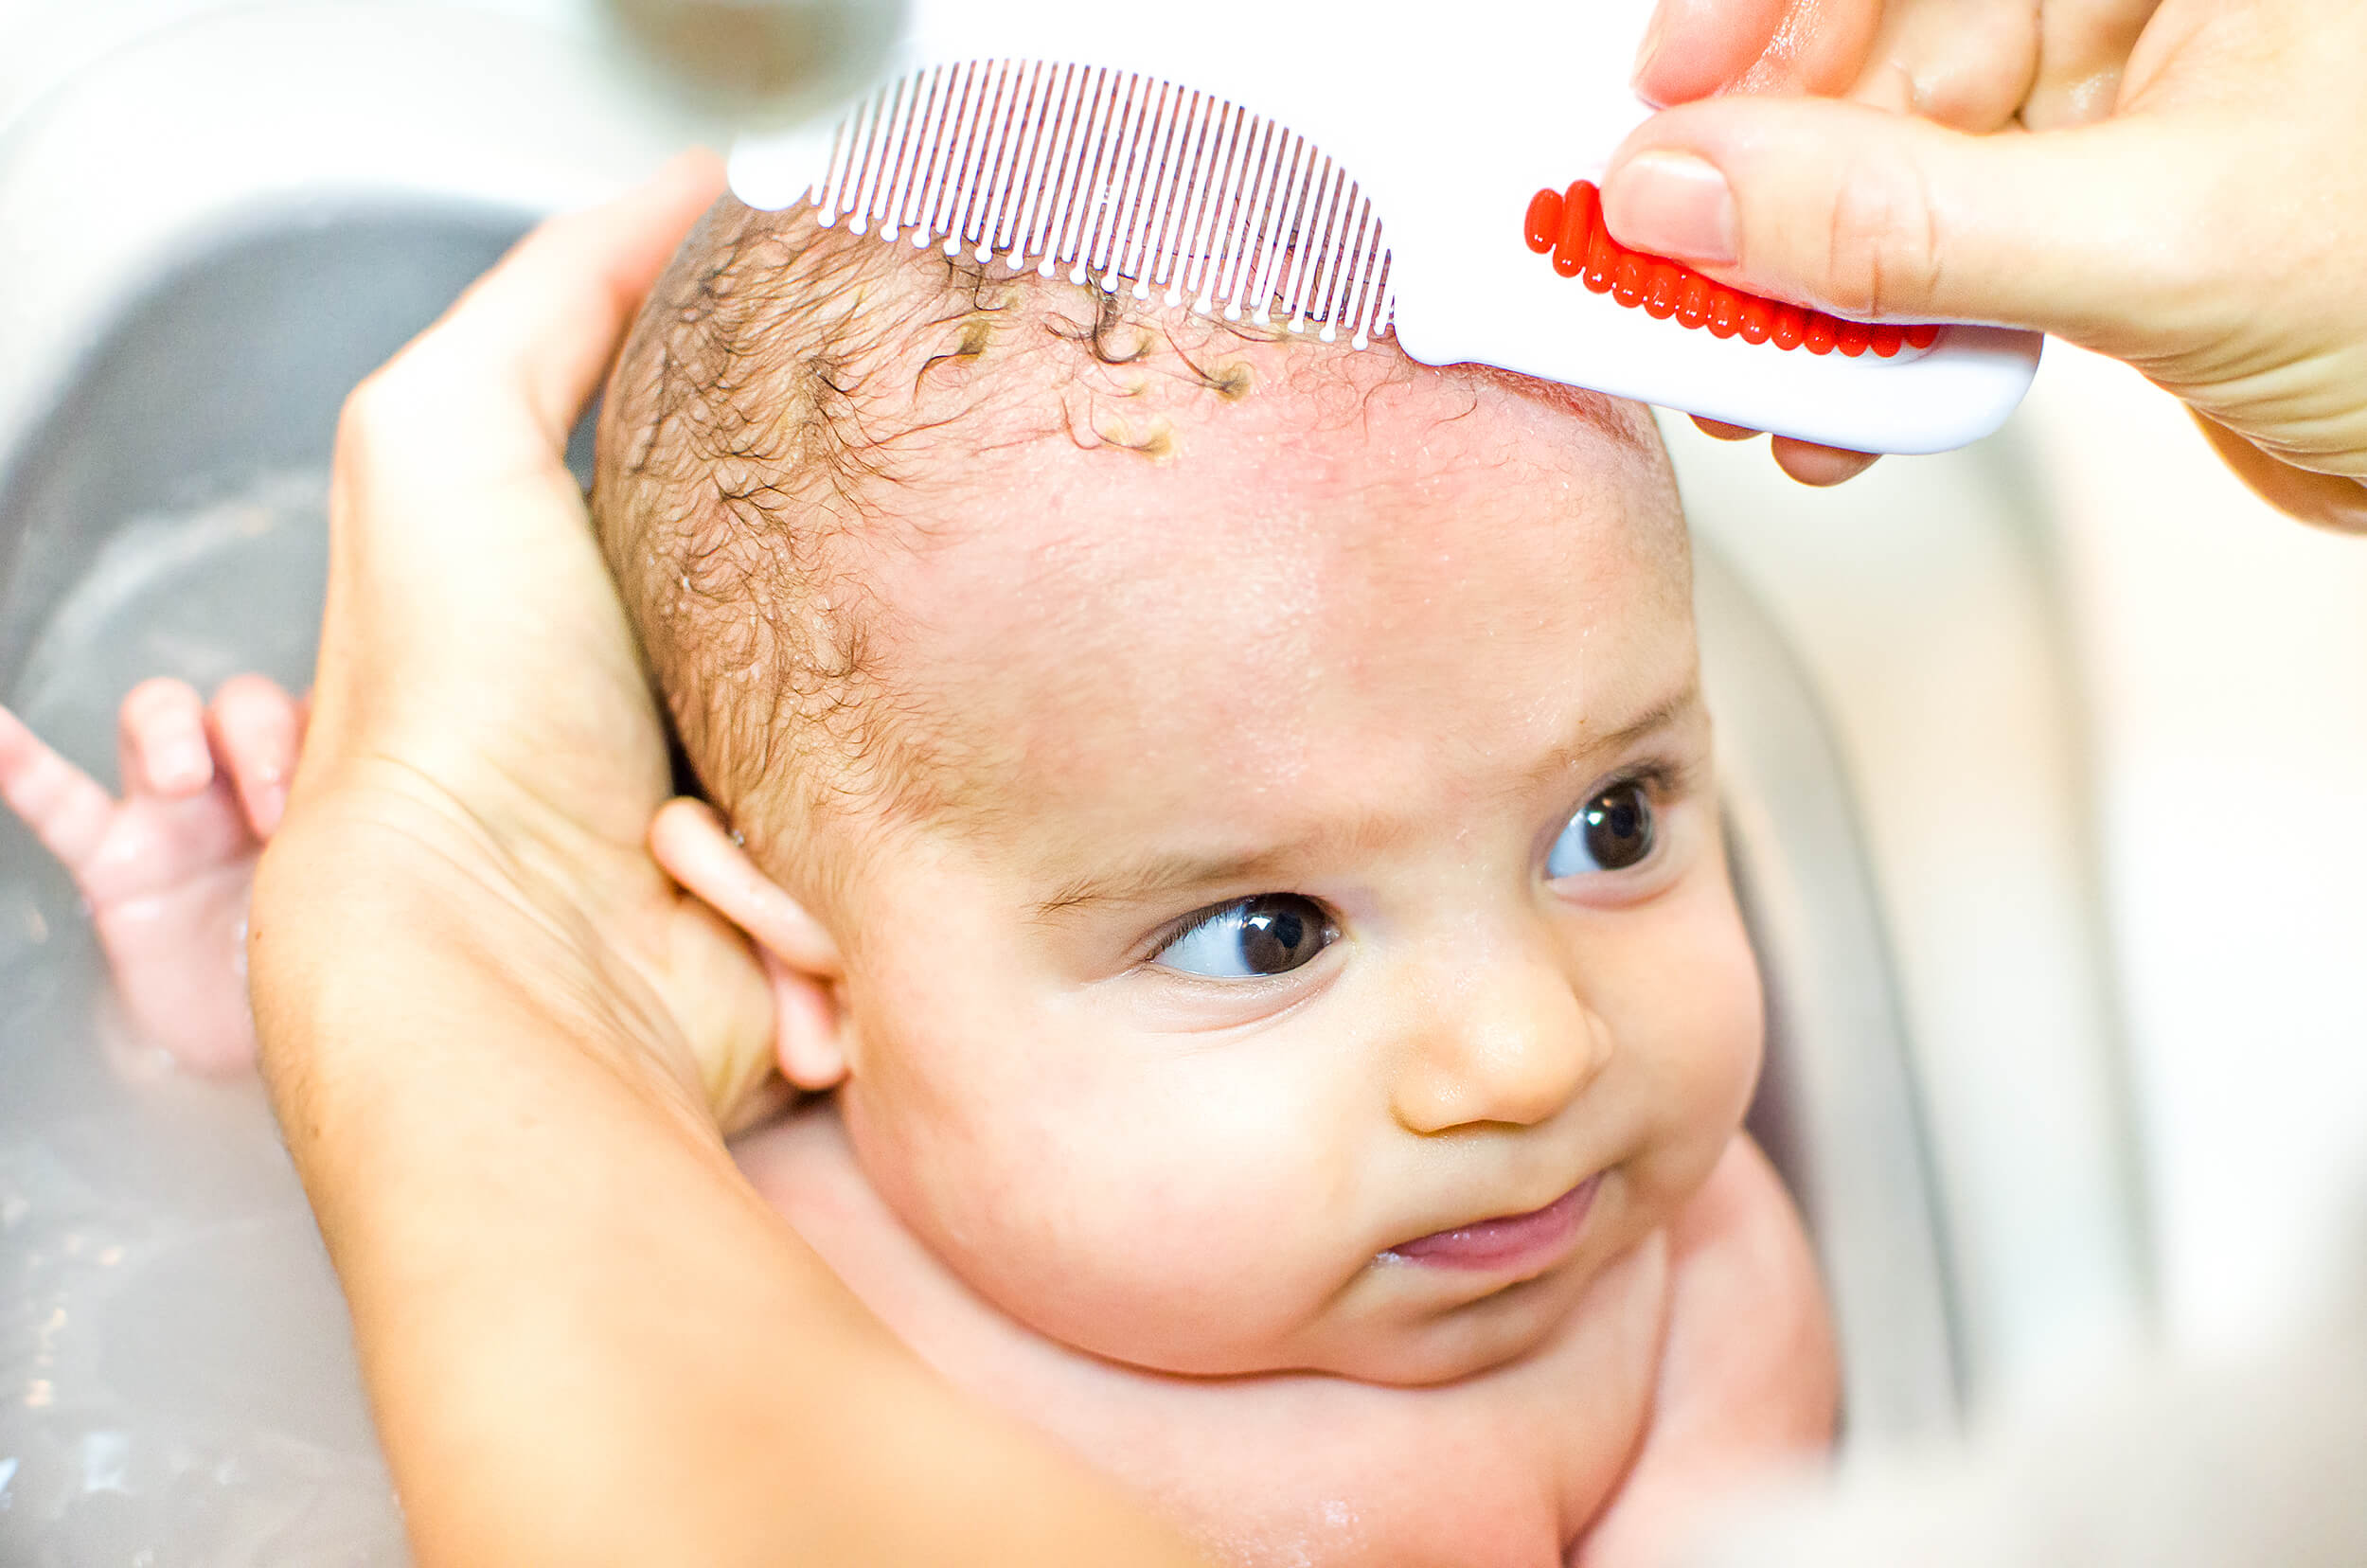 causes of cradle cap and how to treat it